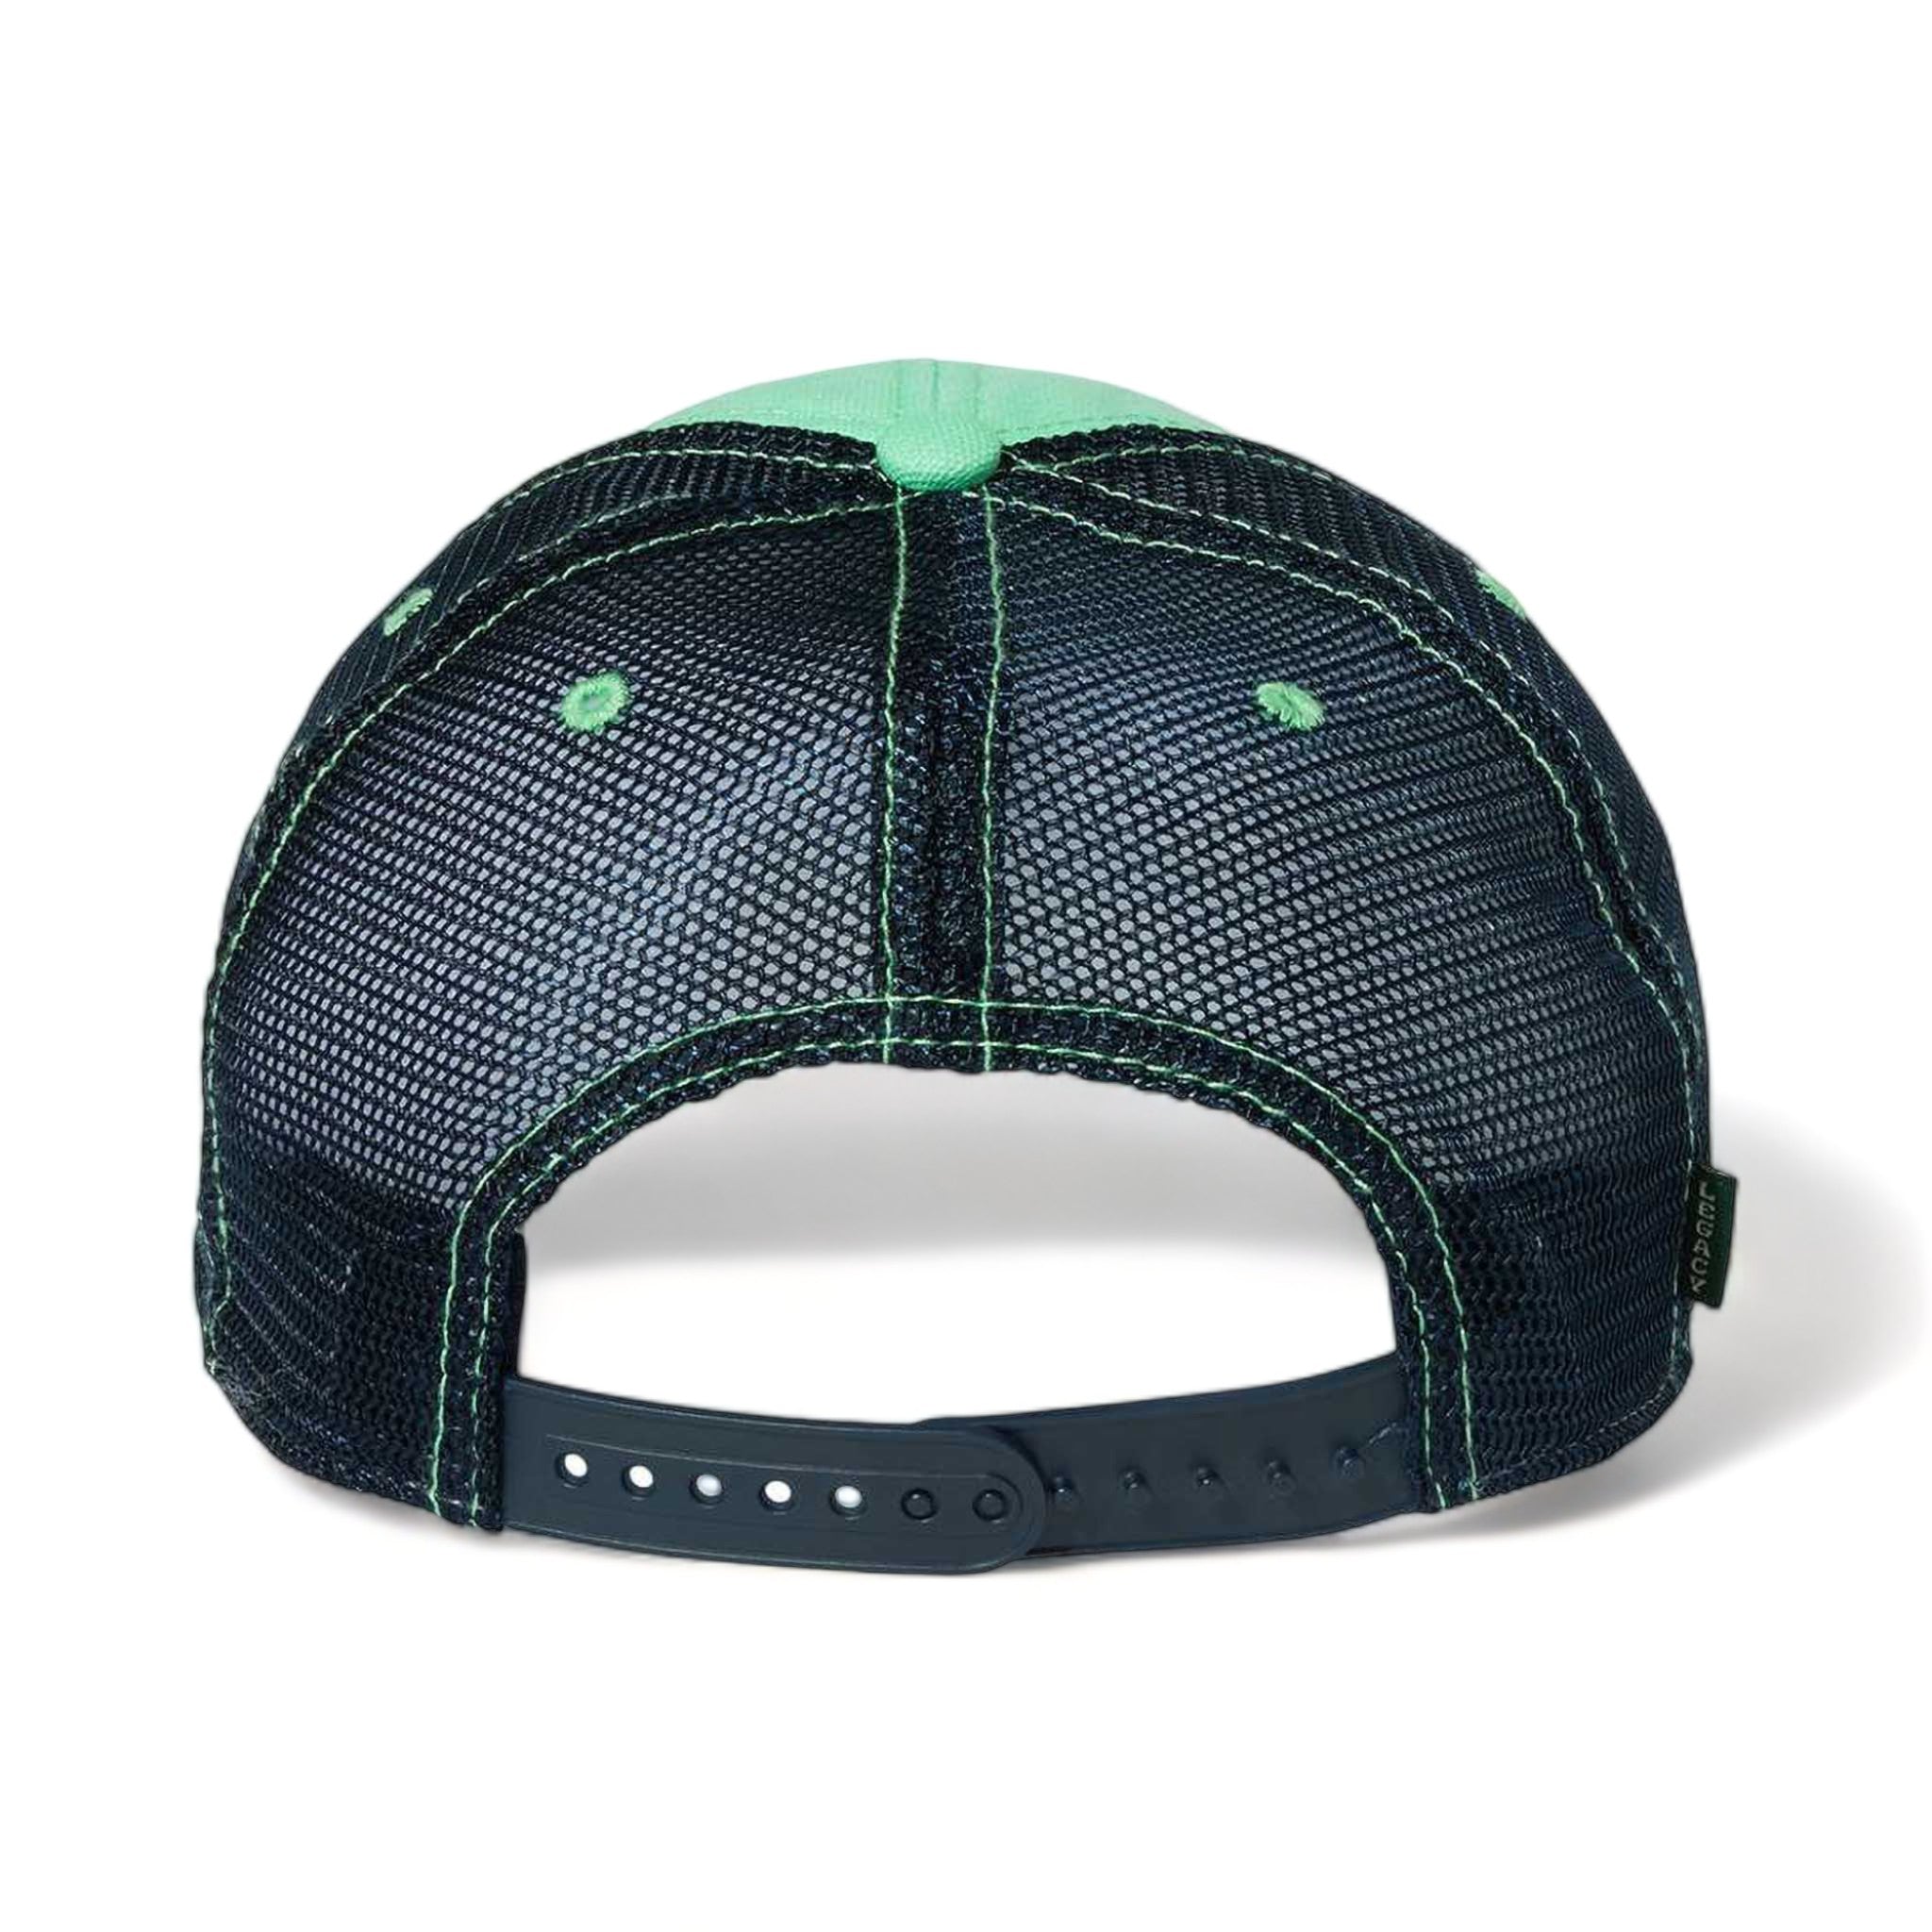 Back view of LEGACY DTA custom hat in spearmint and navy